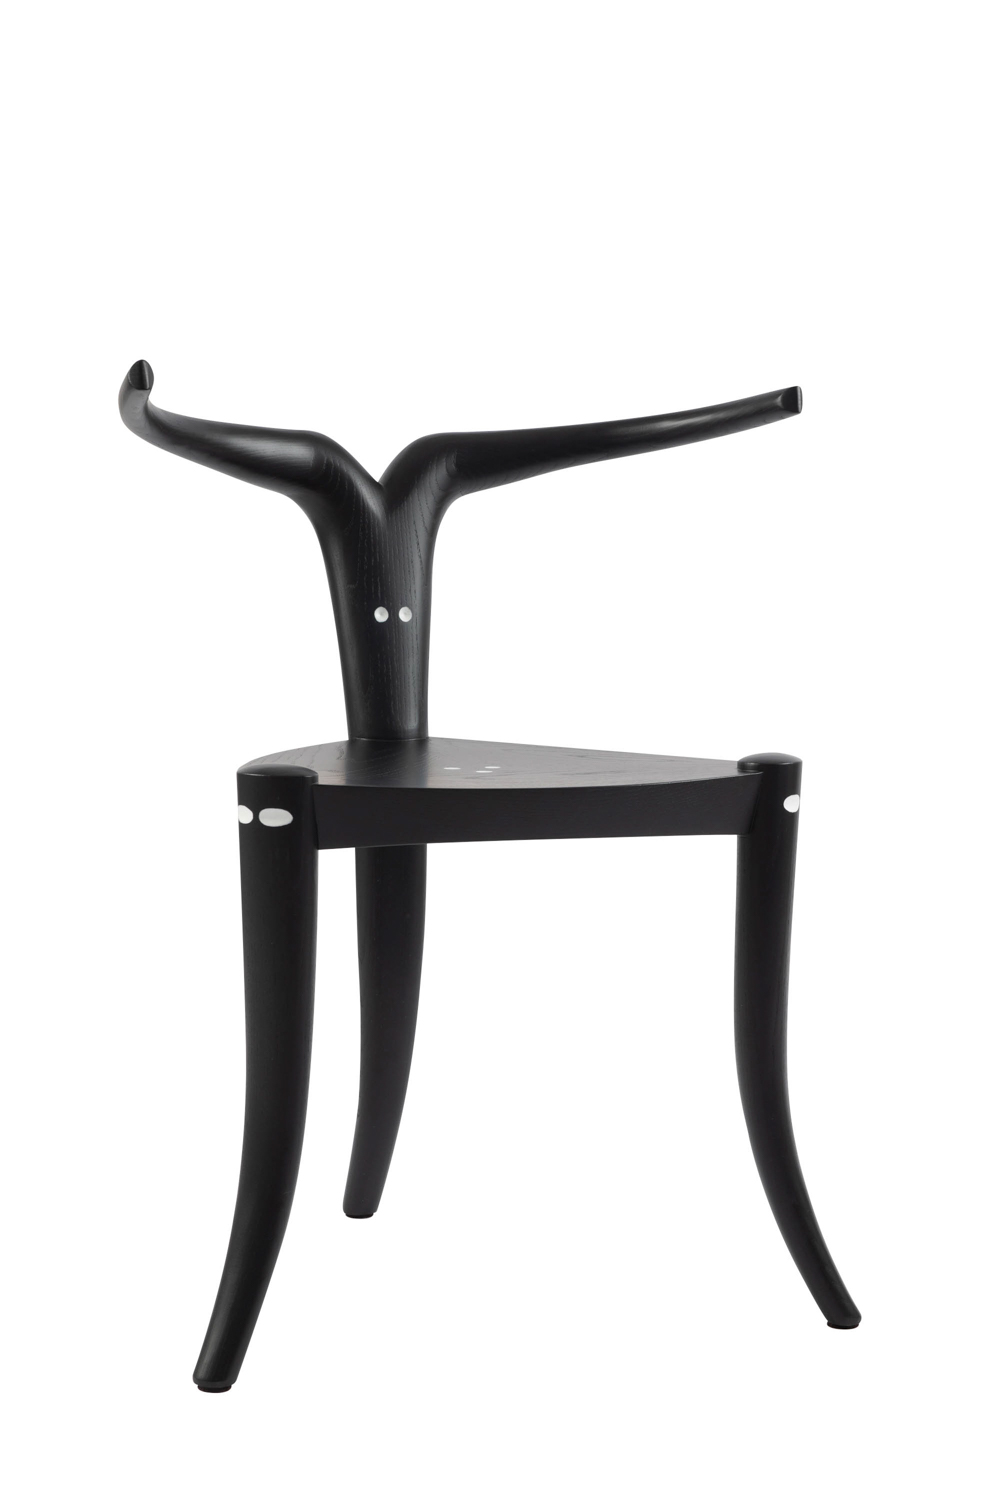 African inspired black table chairs with pointed legs and back